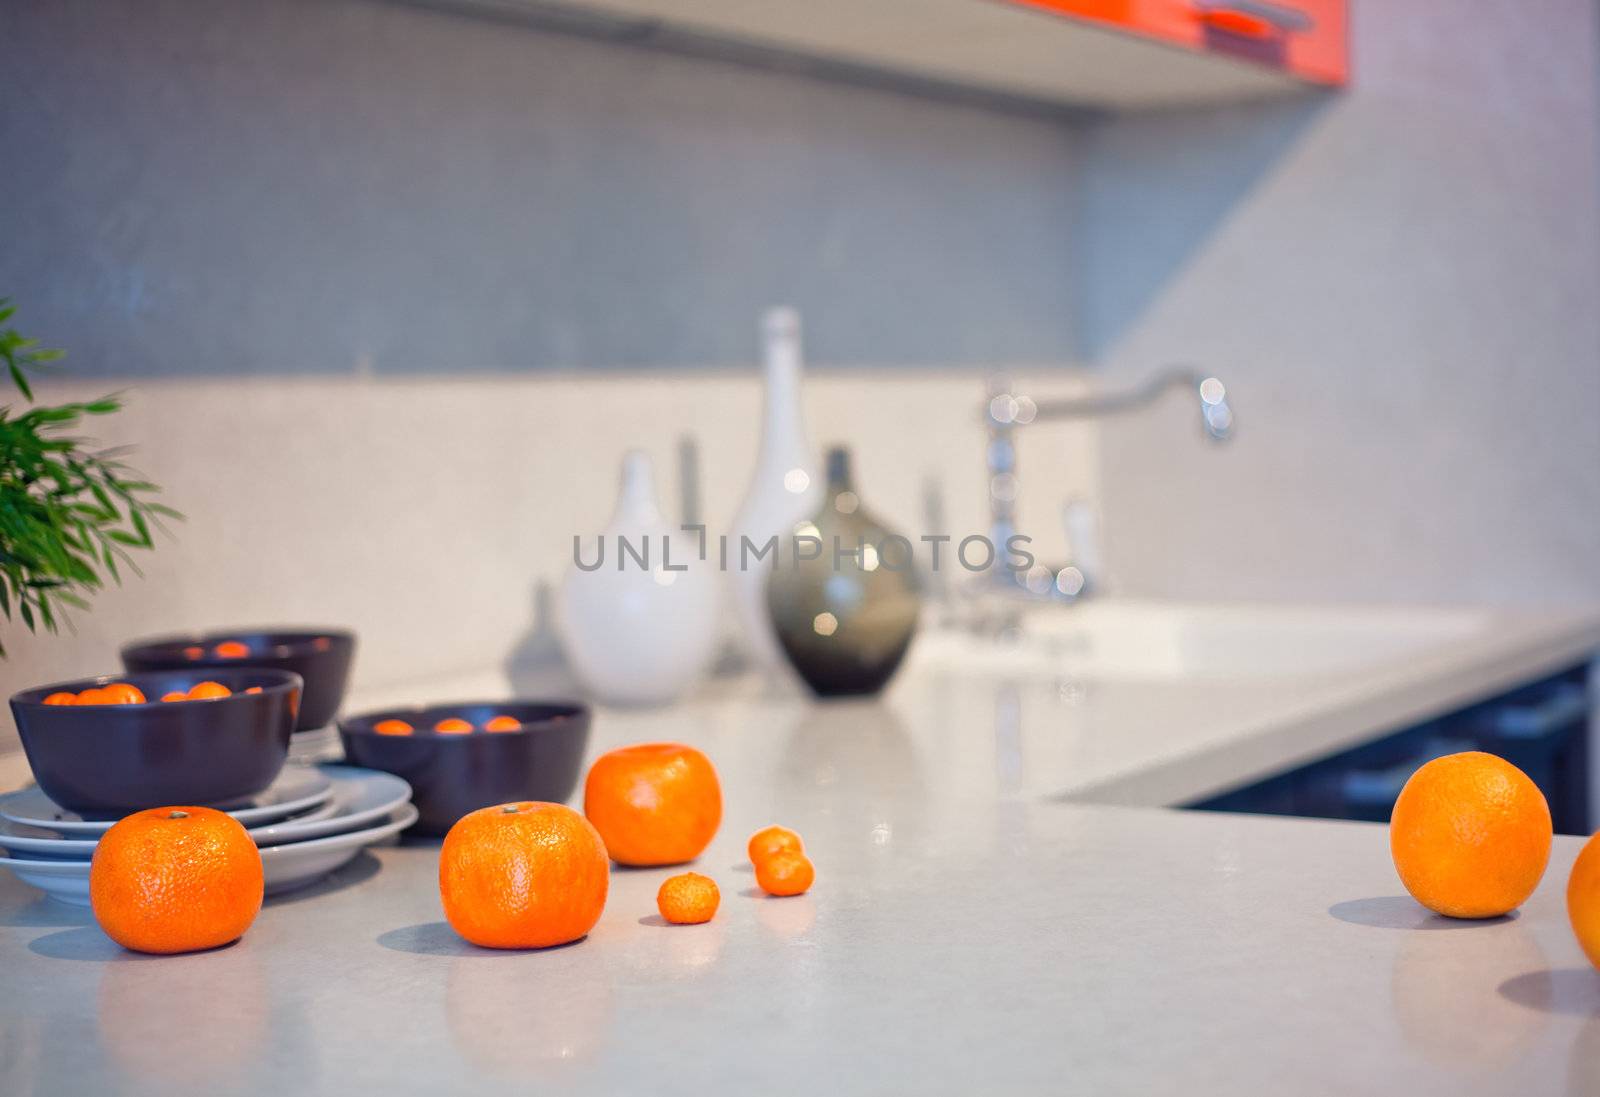  kitchen interior with fruits and dishes  on  countertop (beautiful Depth Of Field effect)
